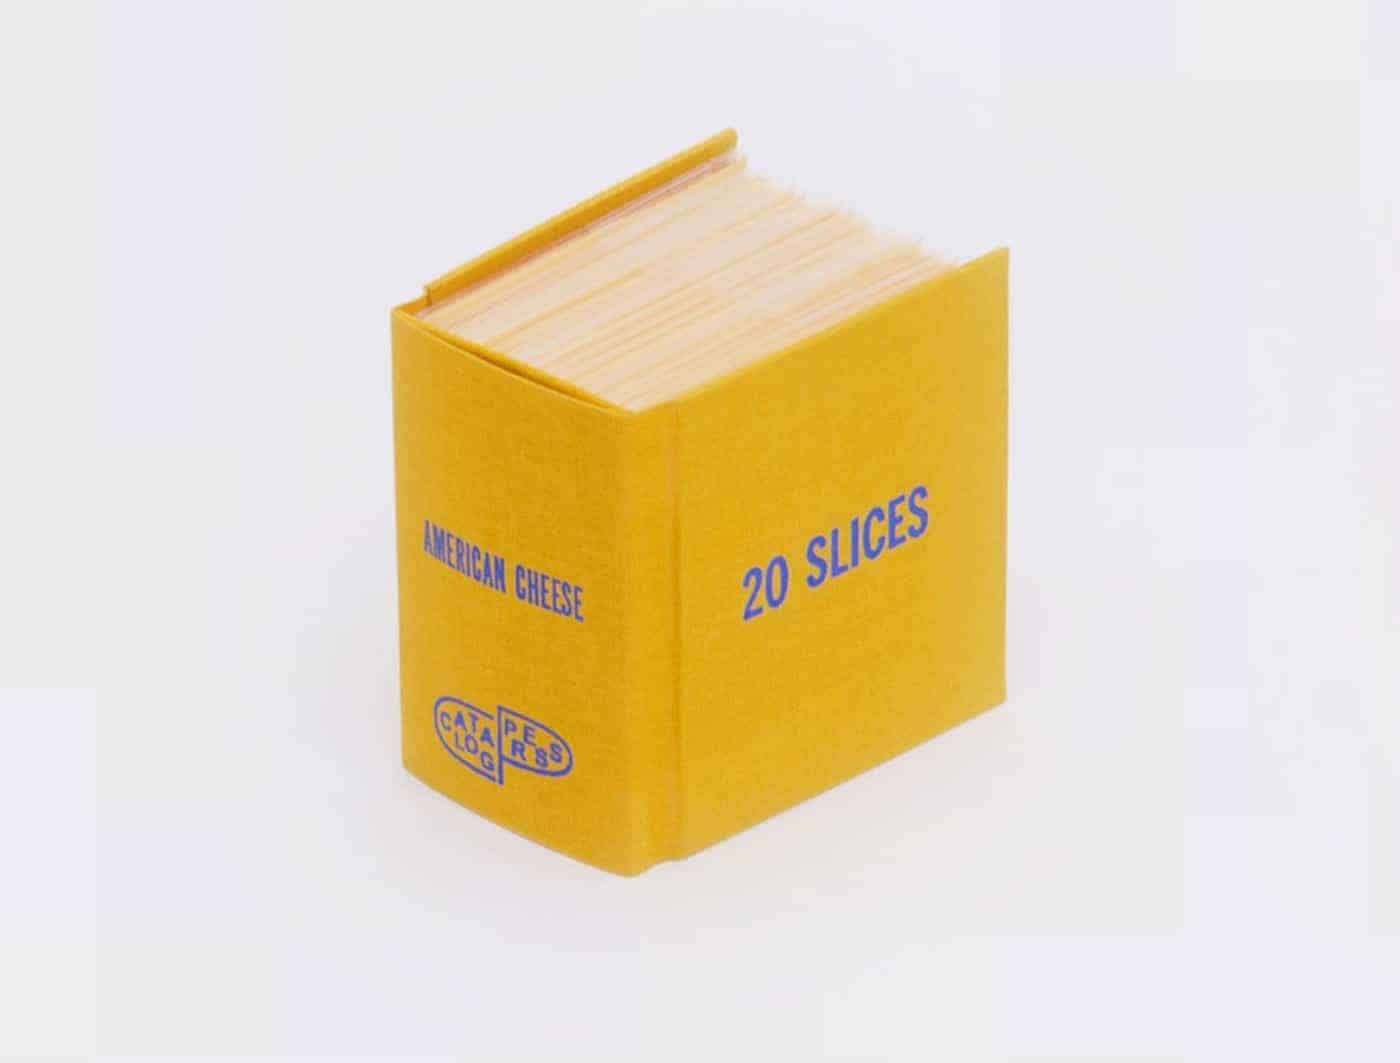 20 SLICES of American Cheese” Image: Ben Denzer/Catalog Press